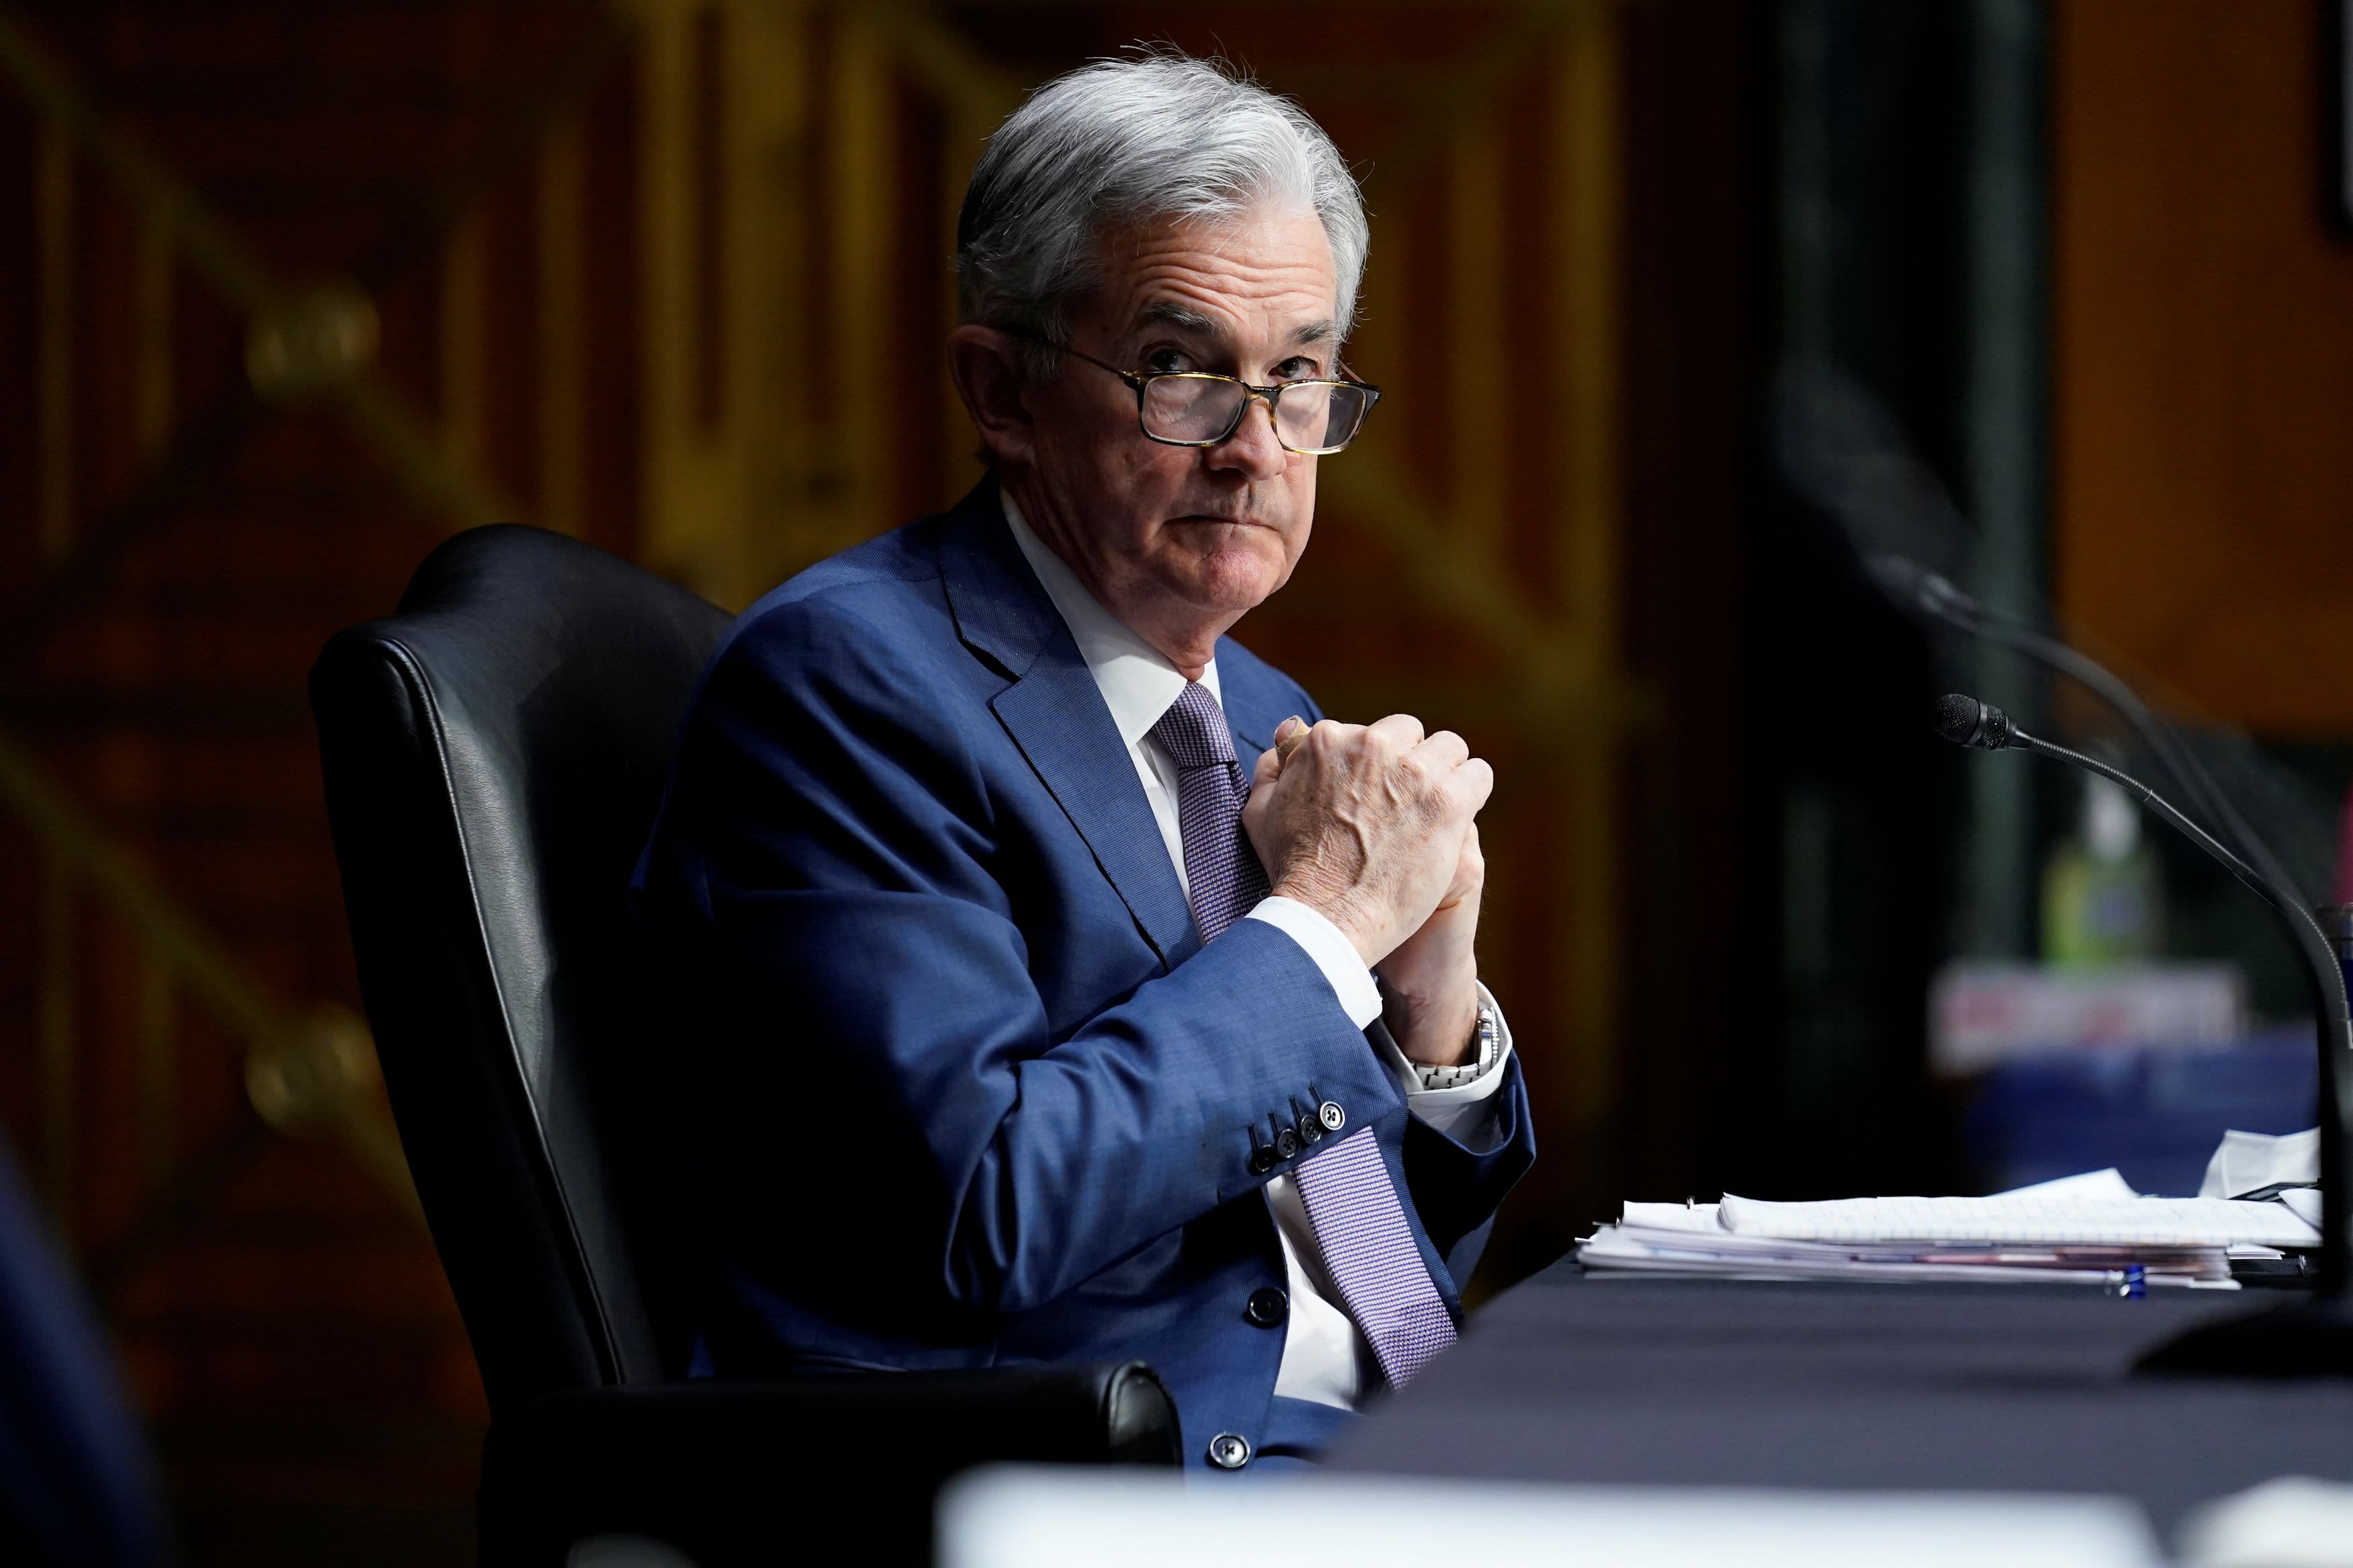 The Fed could be a source of volatility as Powell talks next week